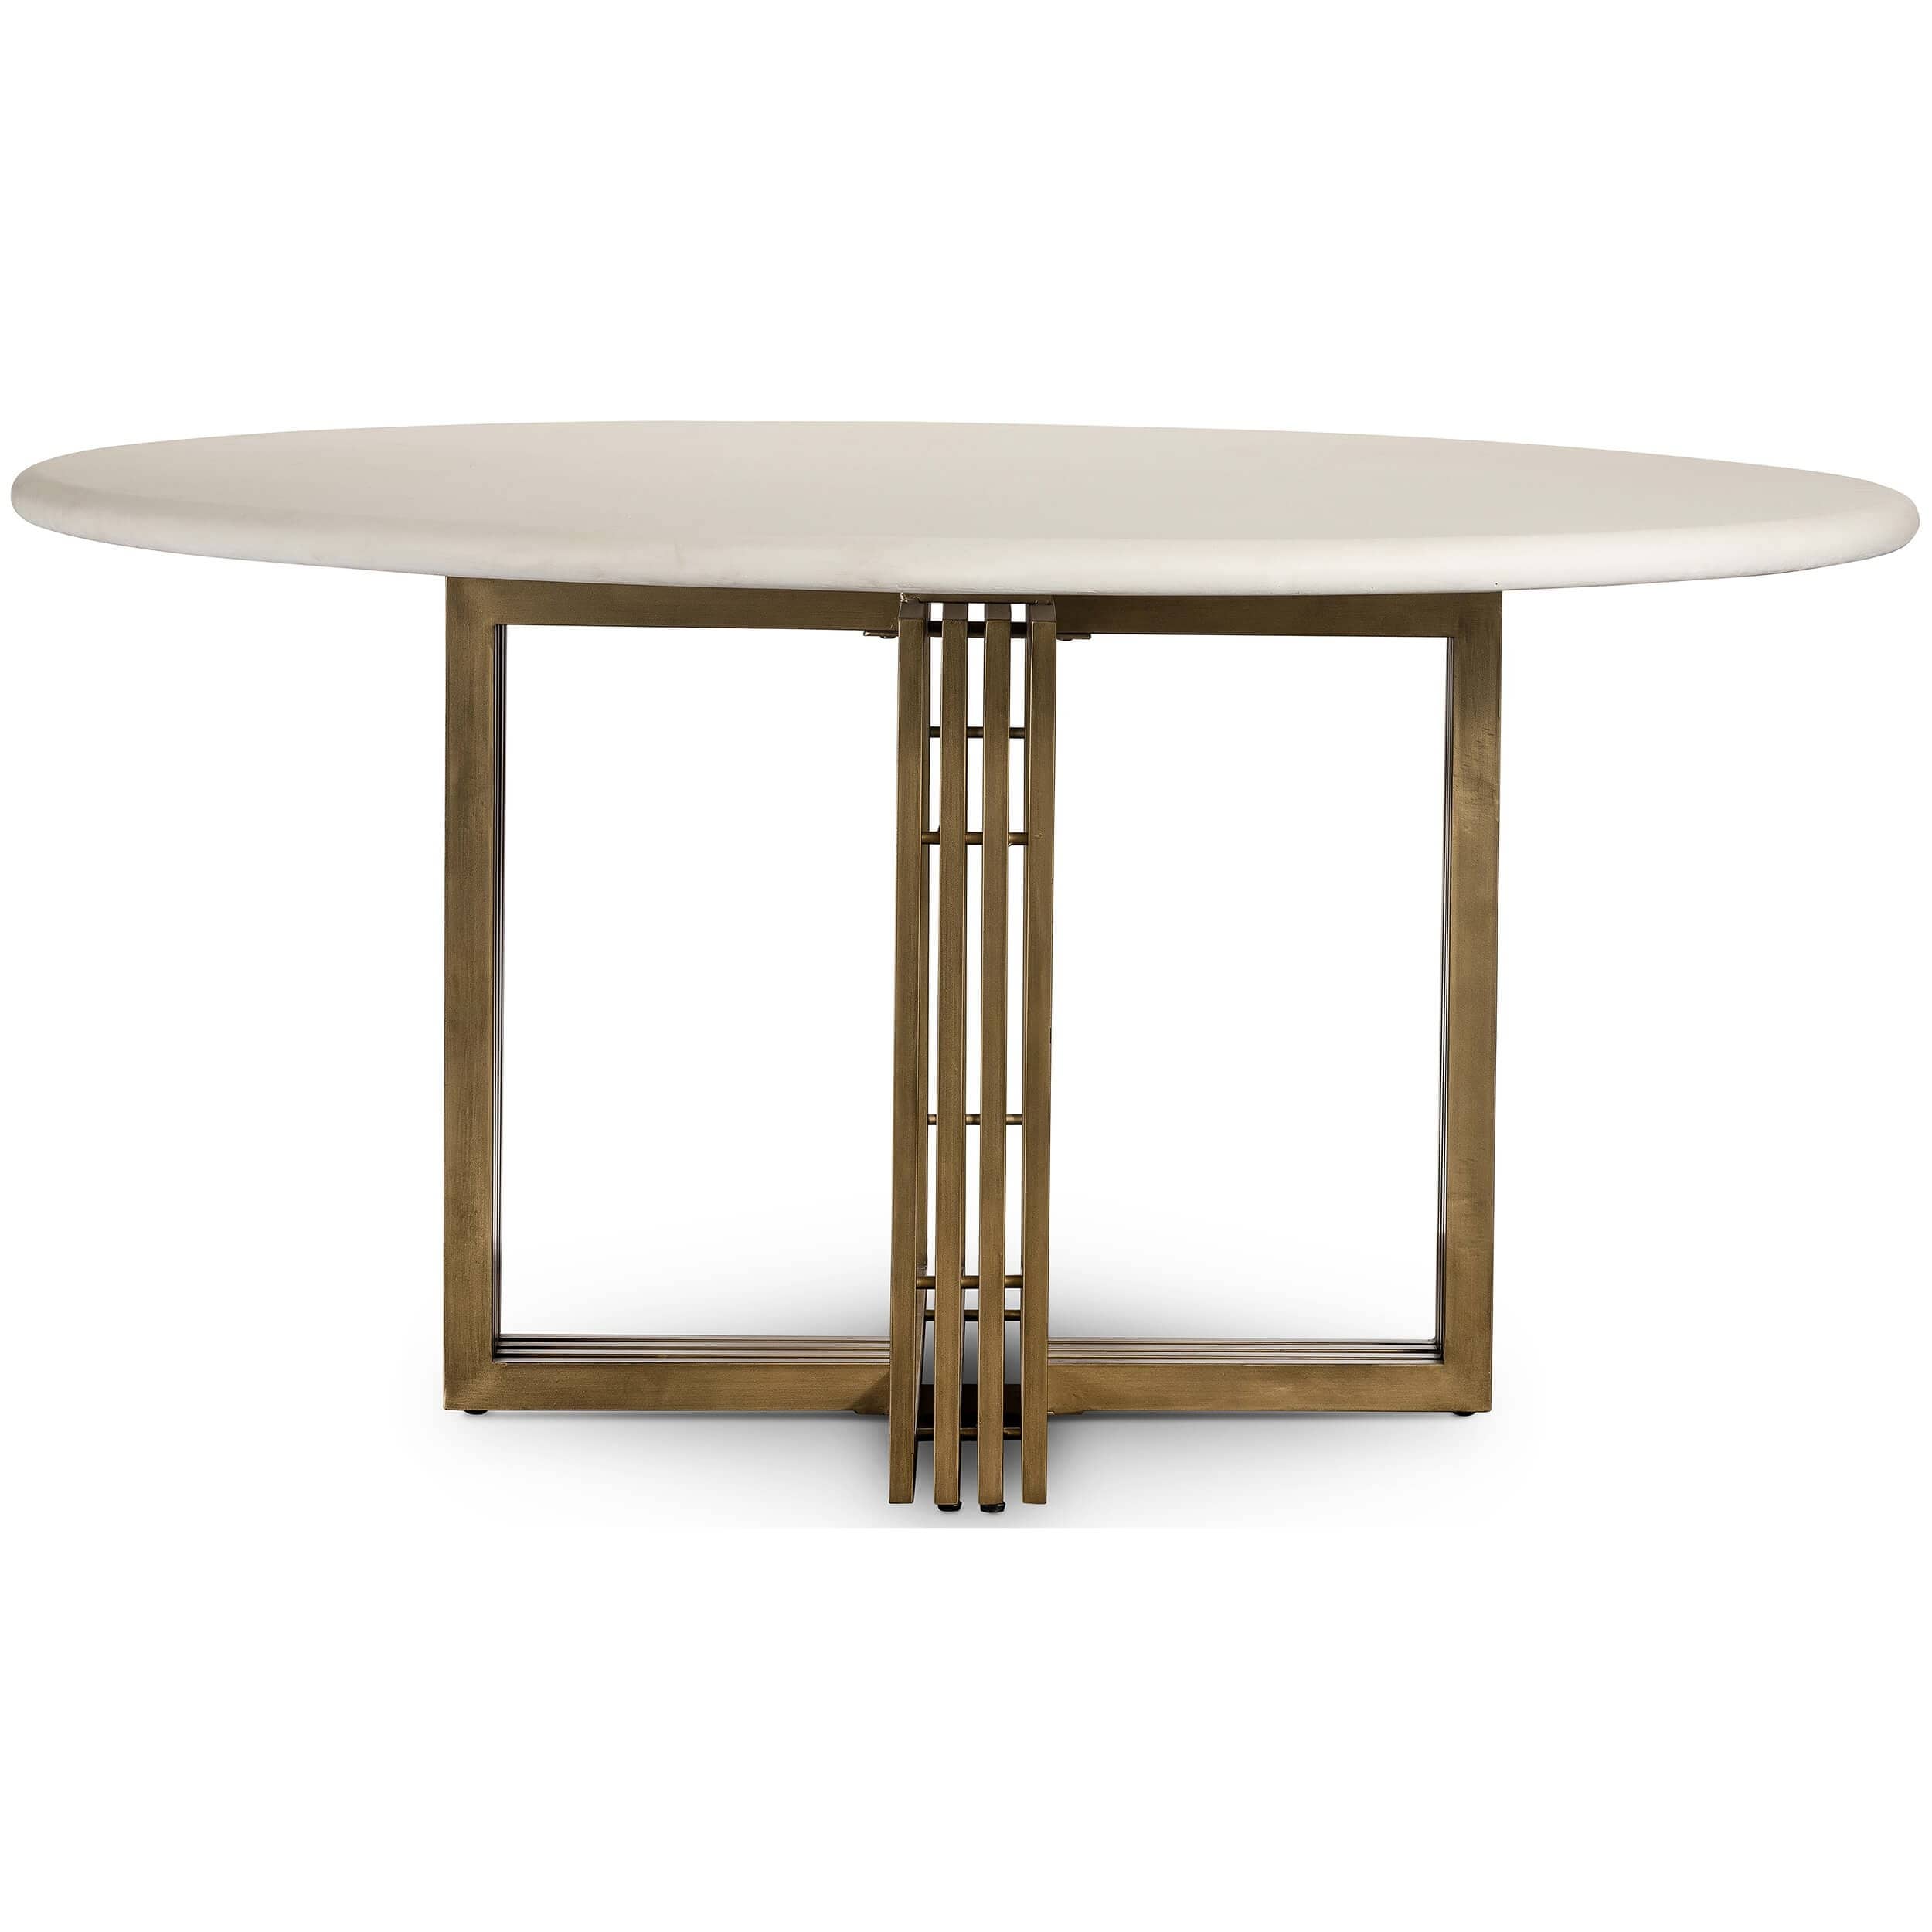 Image of Mia Round Dining Table, Parchment White